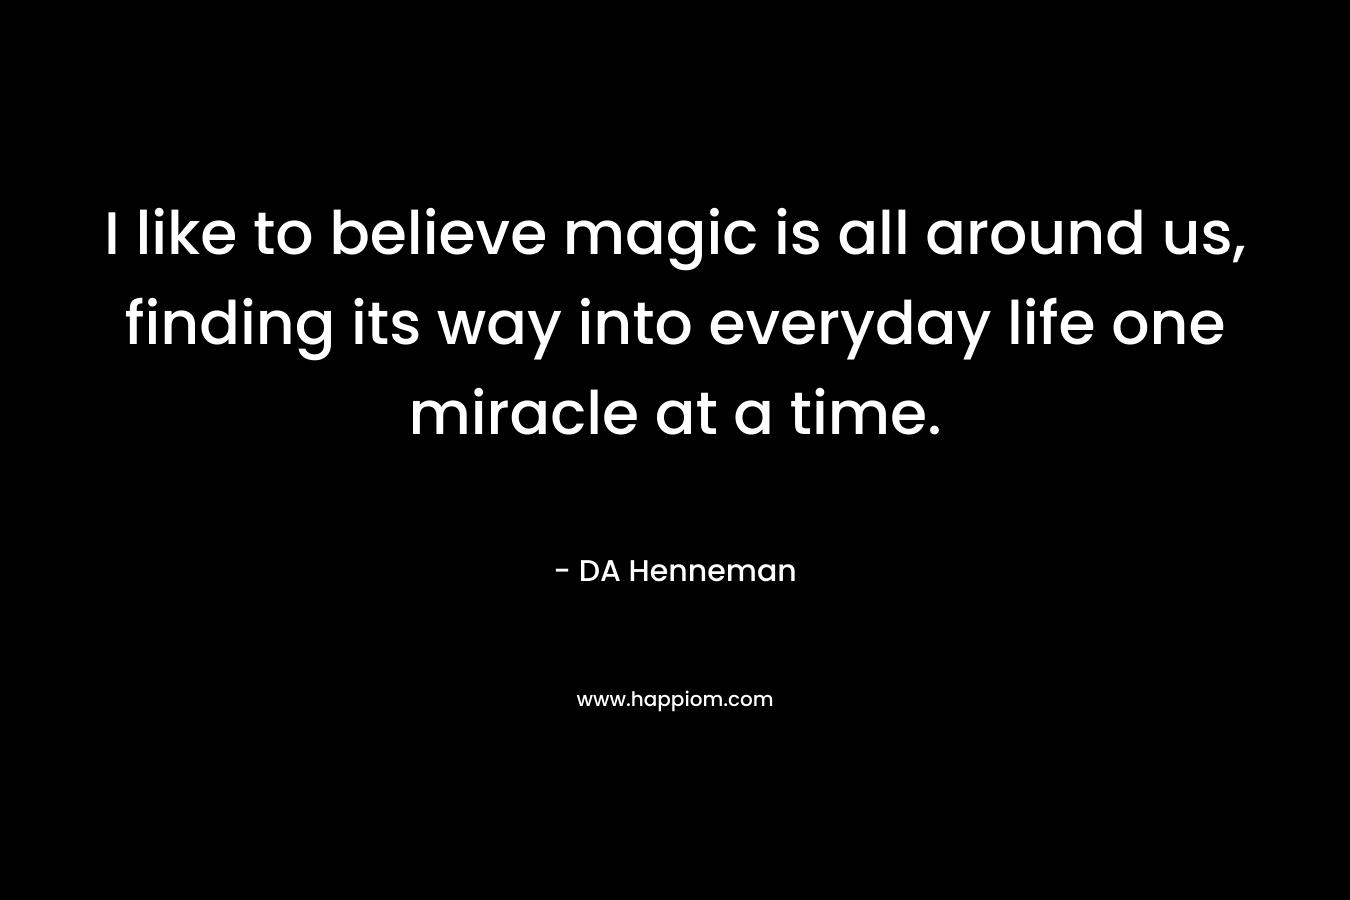 I like to believe magic is all around us, finding its way into everyday life one miracle at a time. – DA Henneman